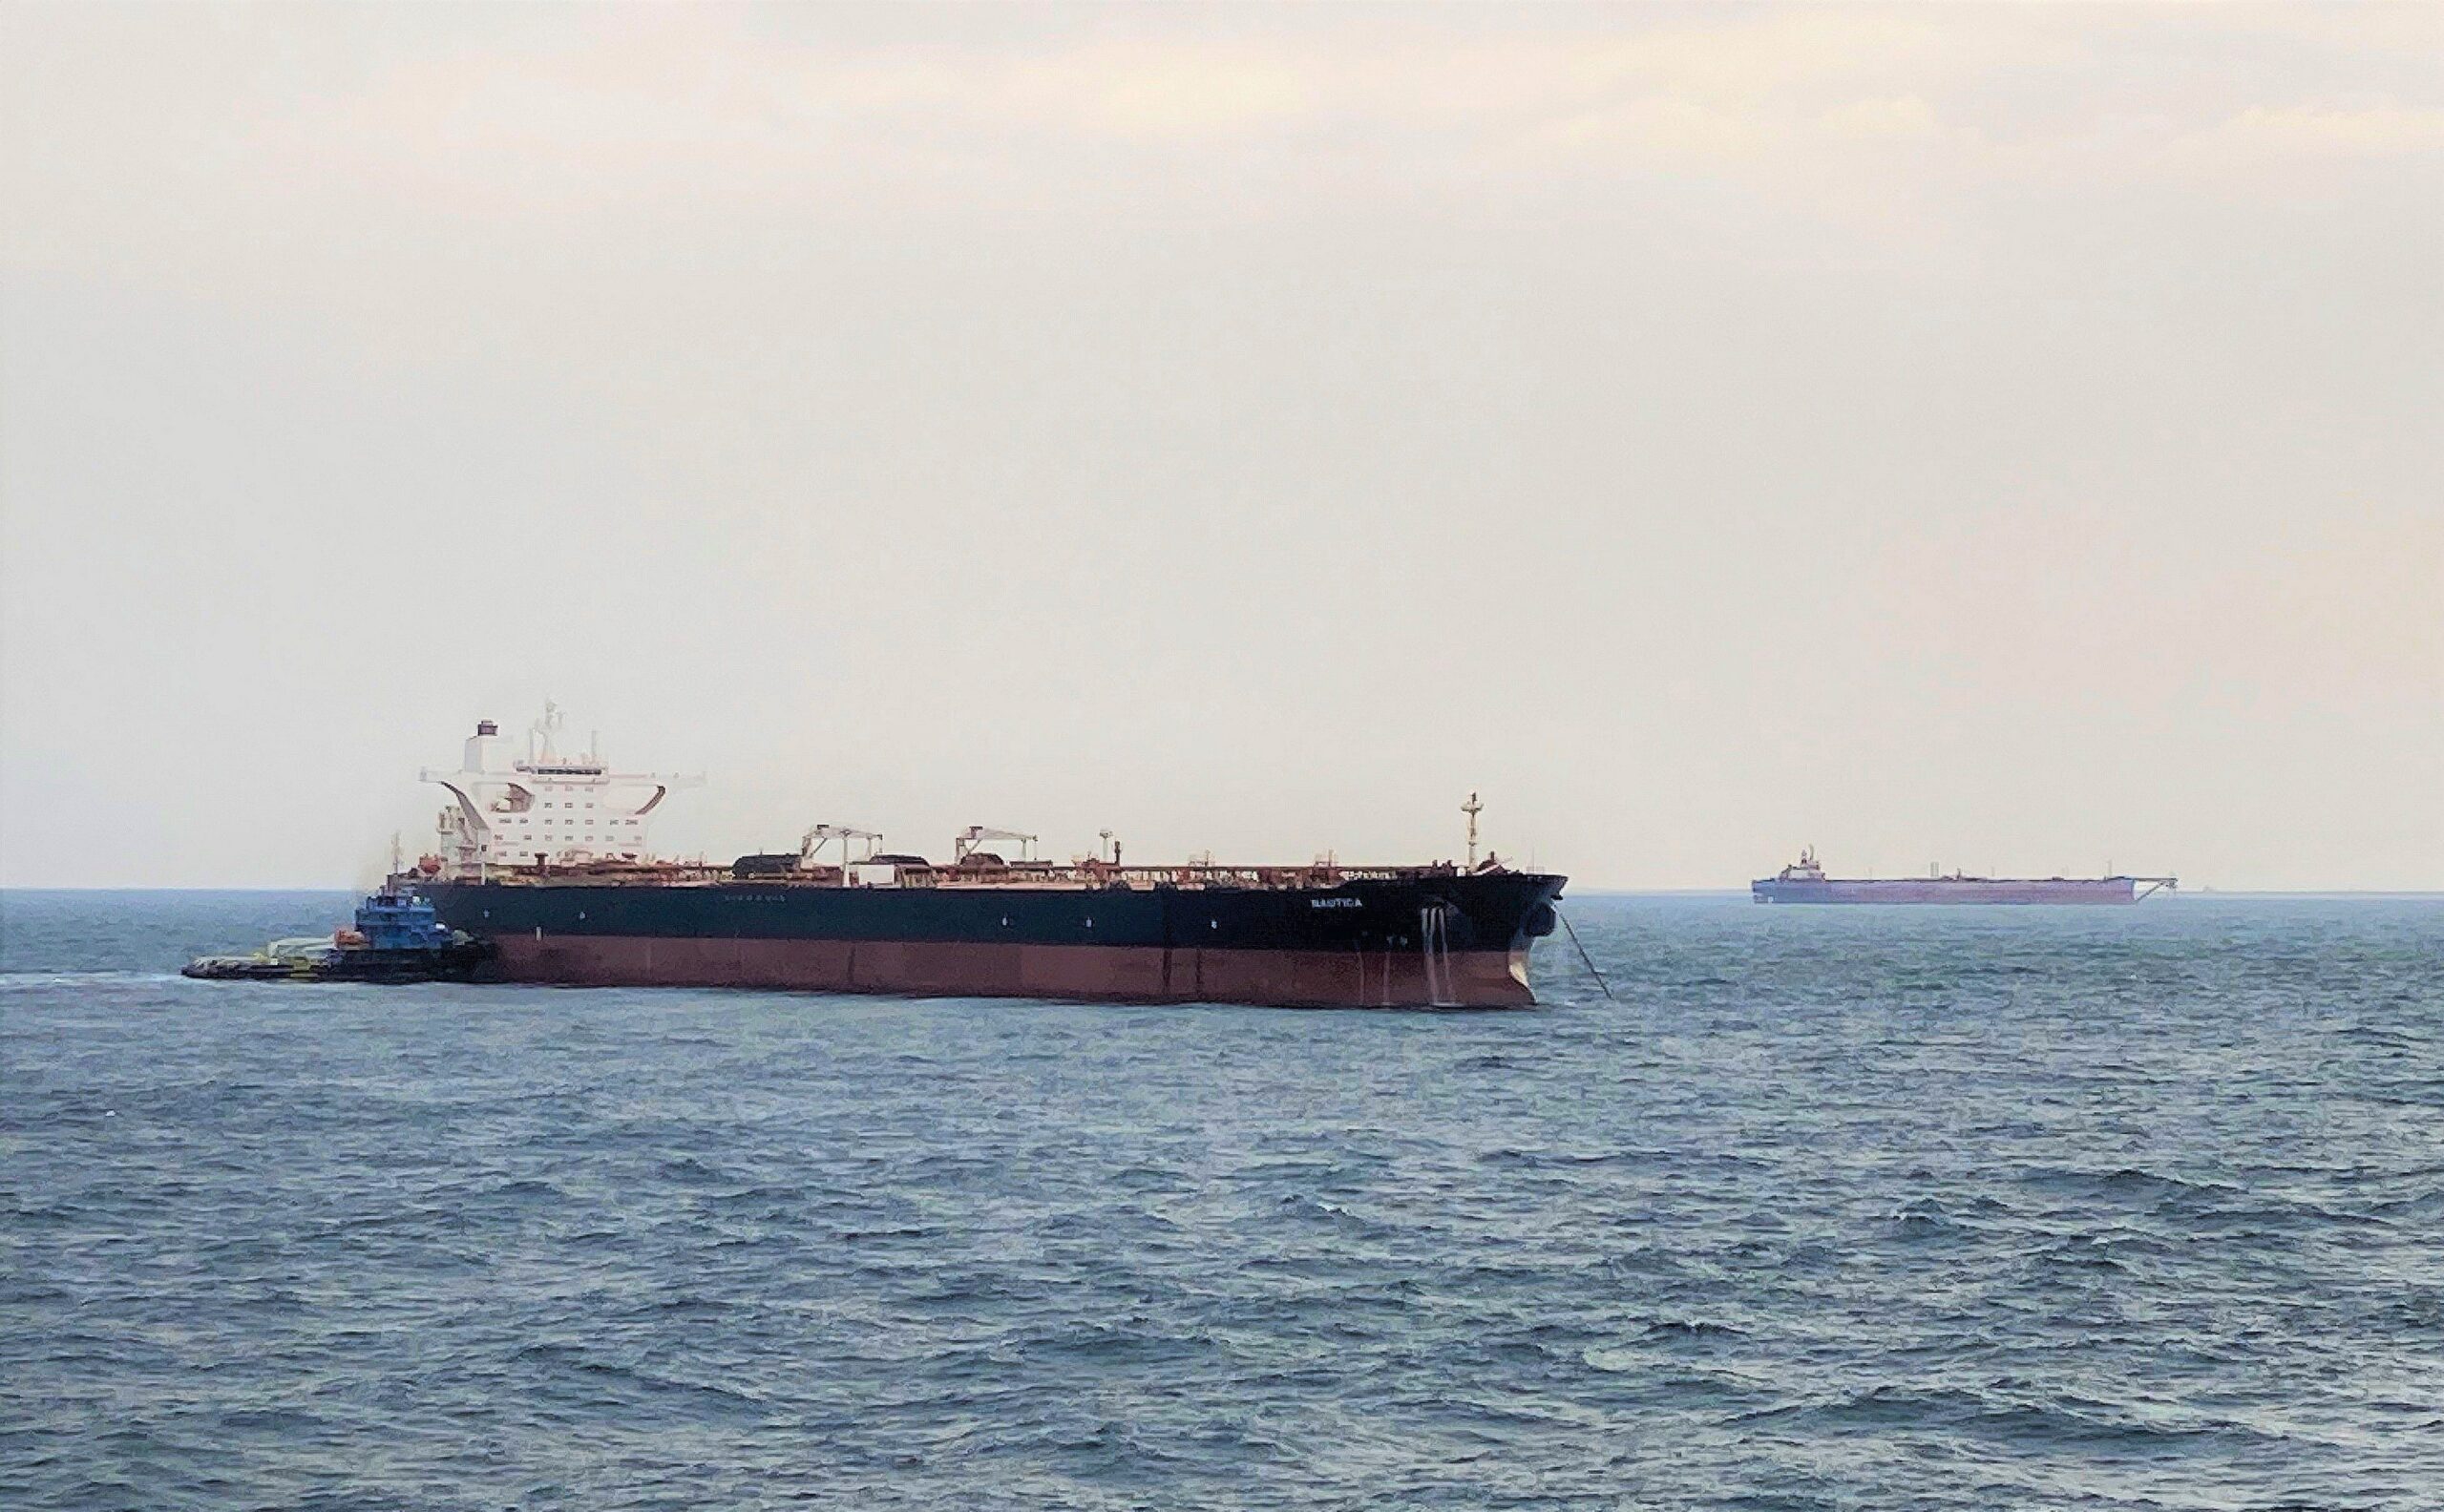 The 'Yemen' replacement tanker with the FSO Safer in the background. Photo: Boskalis